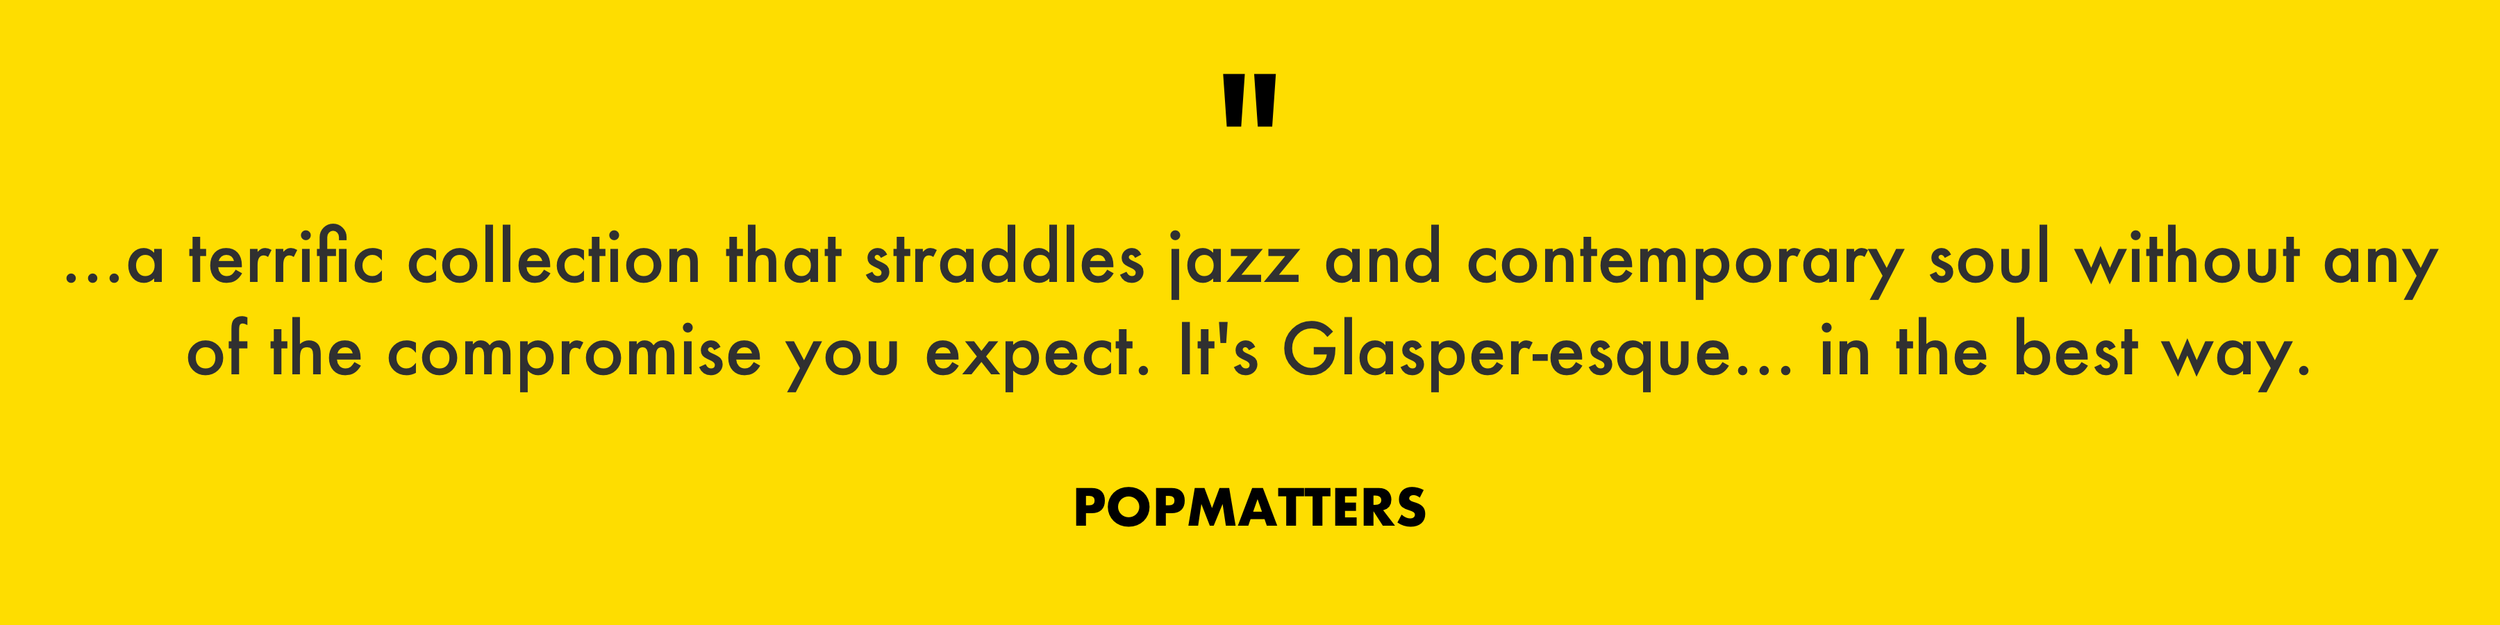 Quote_PopMatters-yellow.png